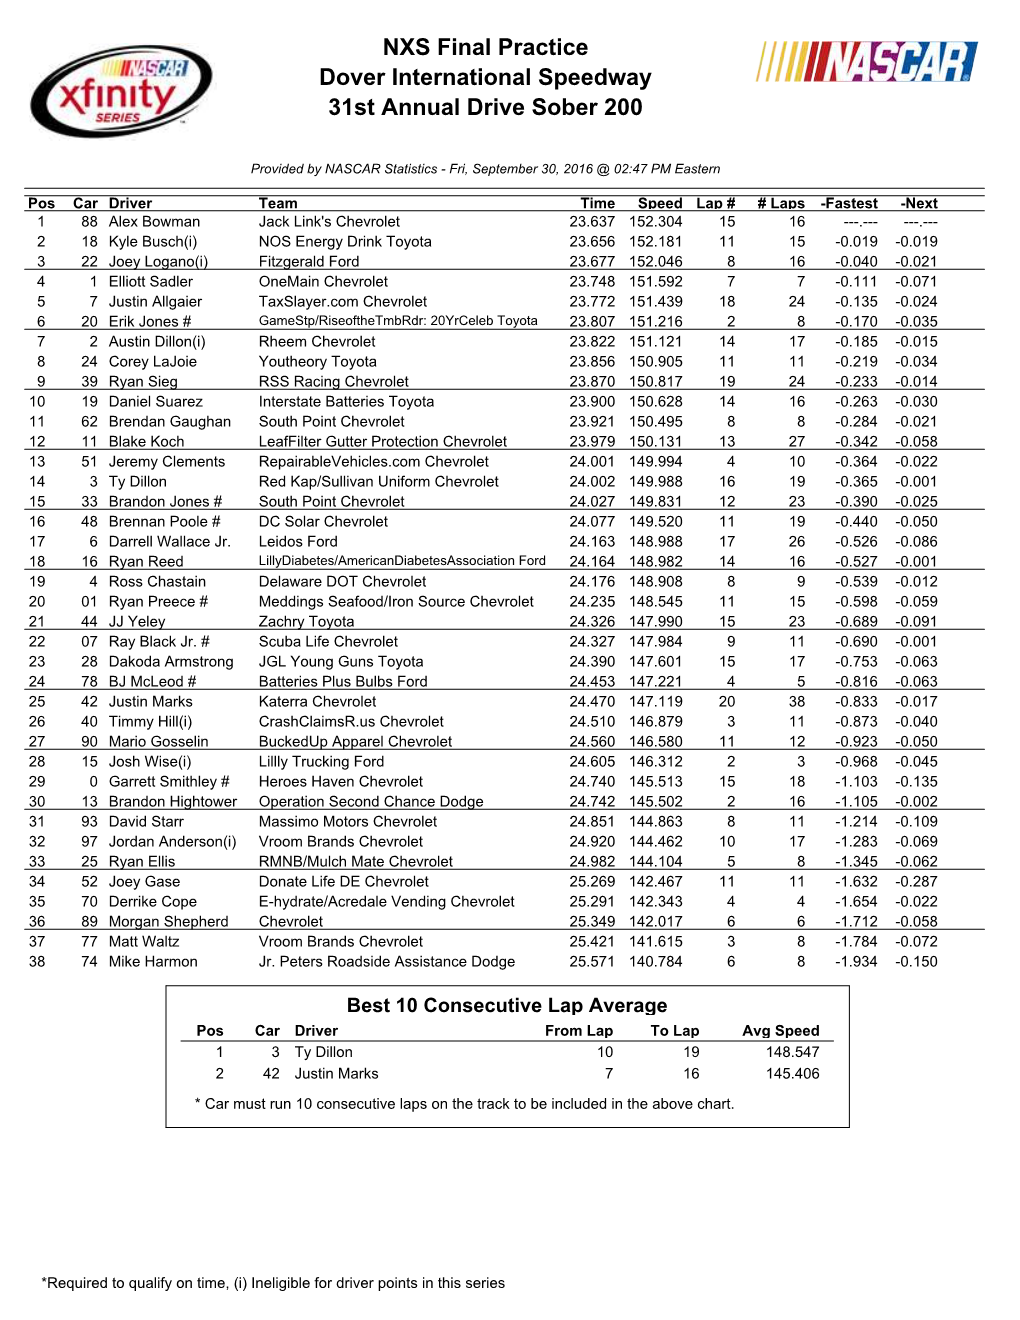 NXS Final Practice Dover International Speedway 31St Annual Drive Sober 200